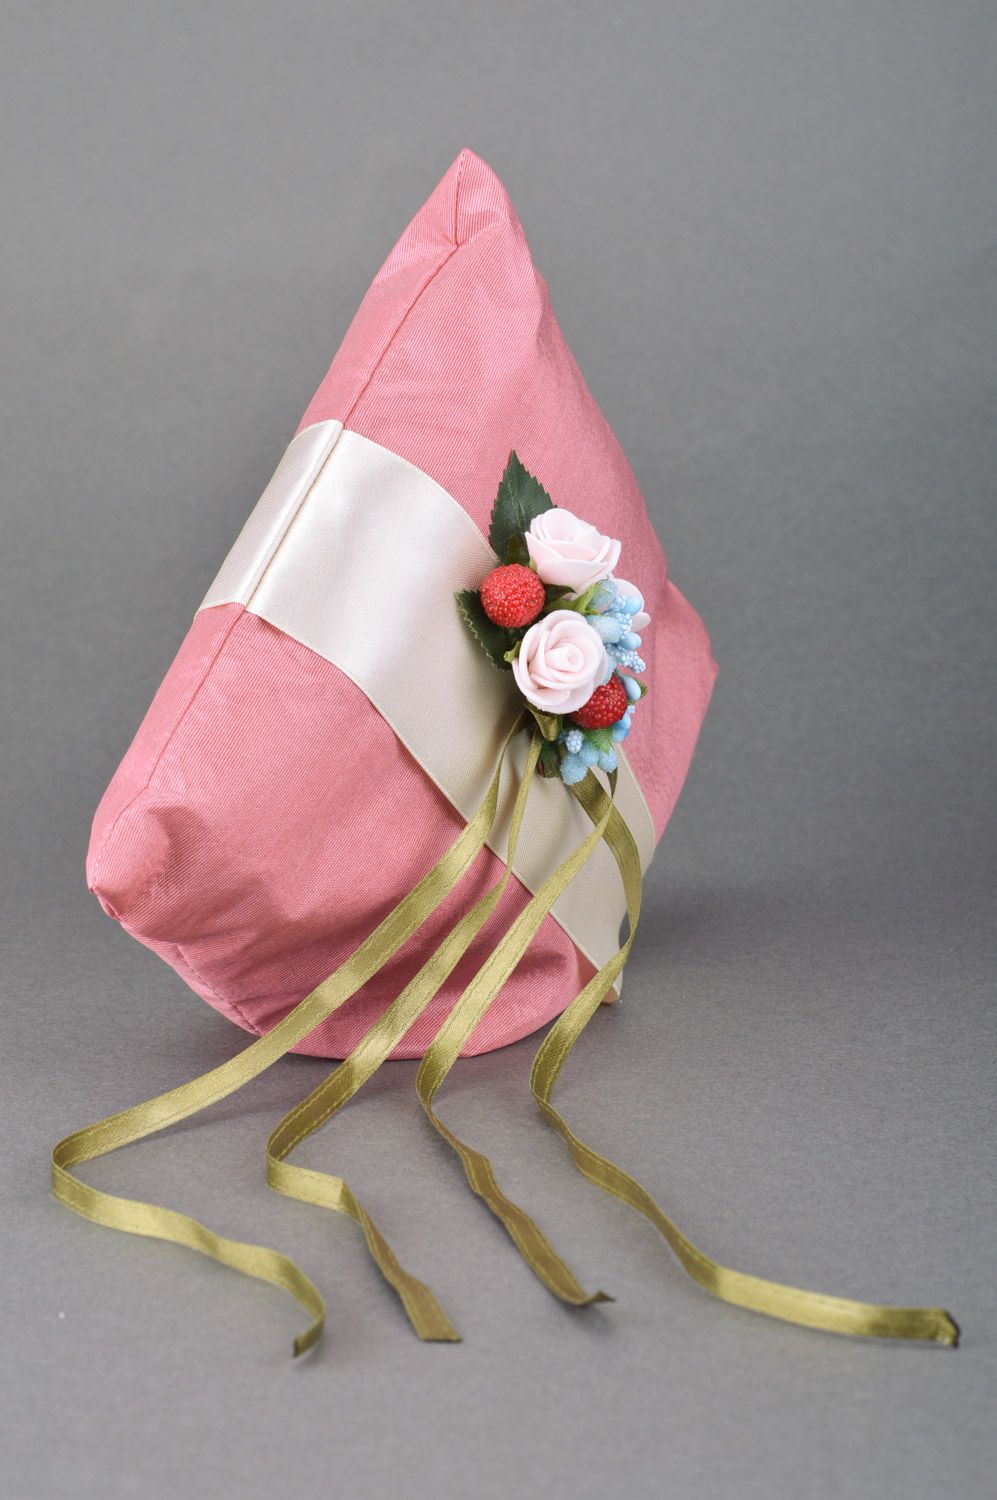 Handmade wedding rings pillow sewn of pink satin fabric with flowers and ribbons photo 5